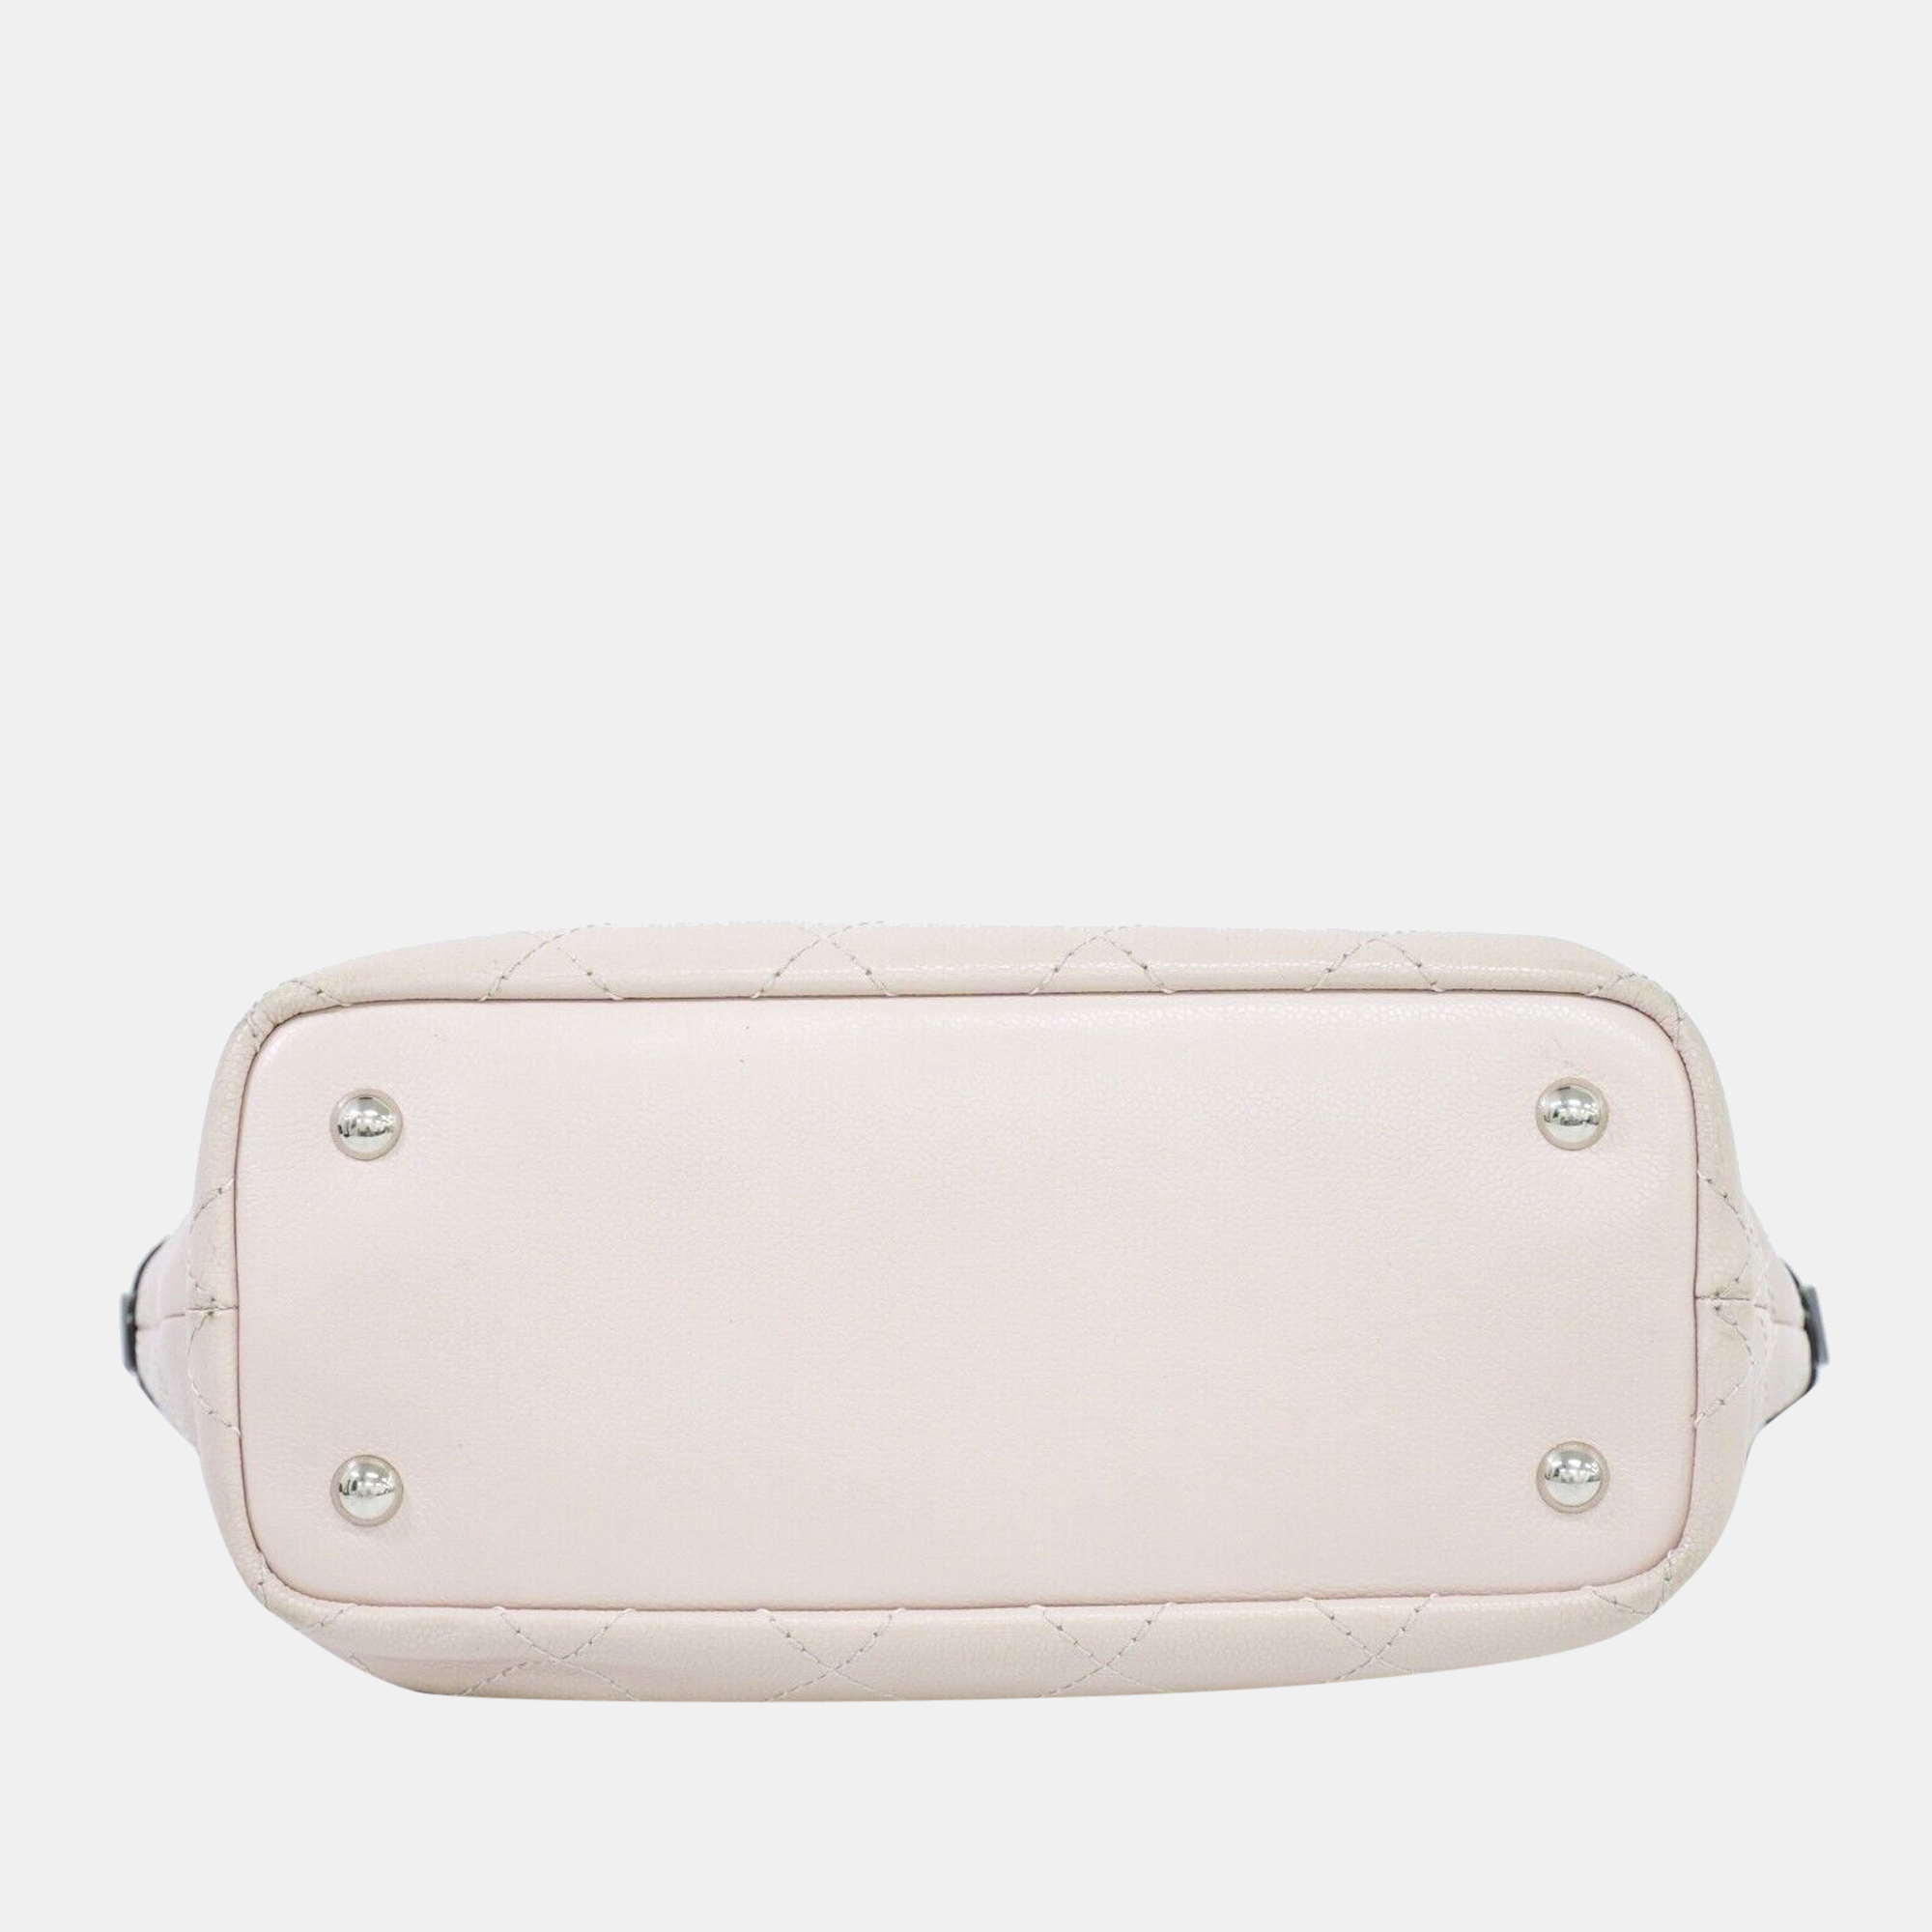 Chanel White Leather Cabas Bag